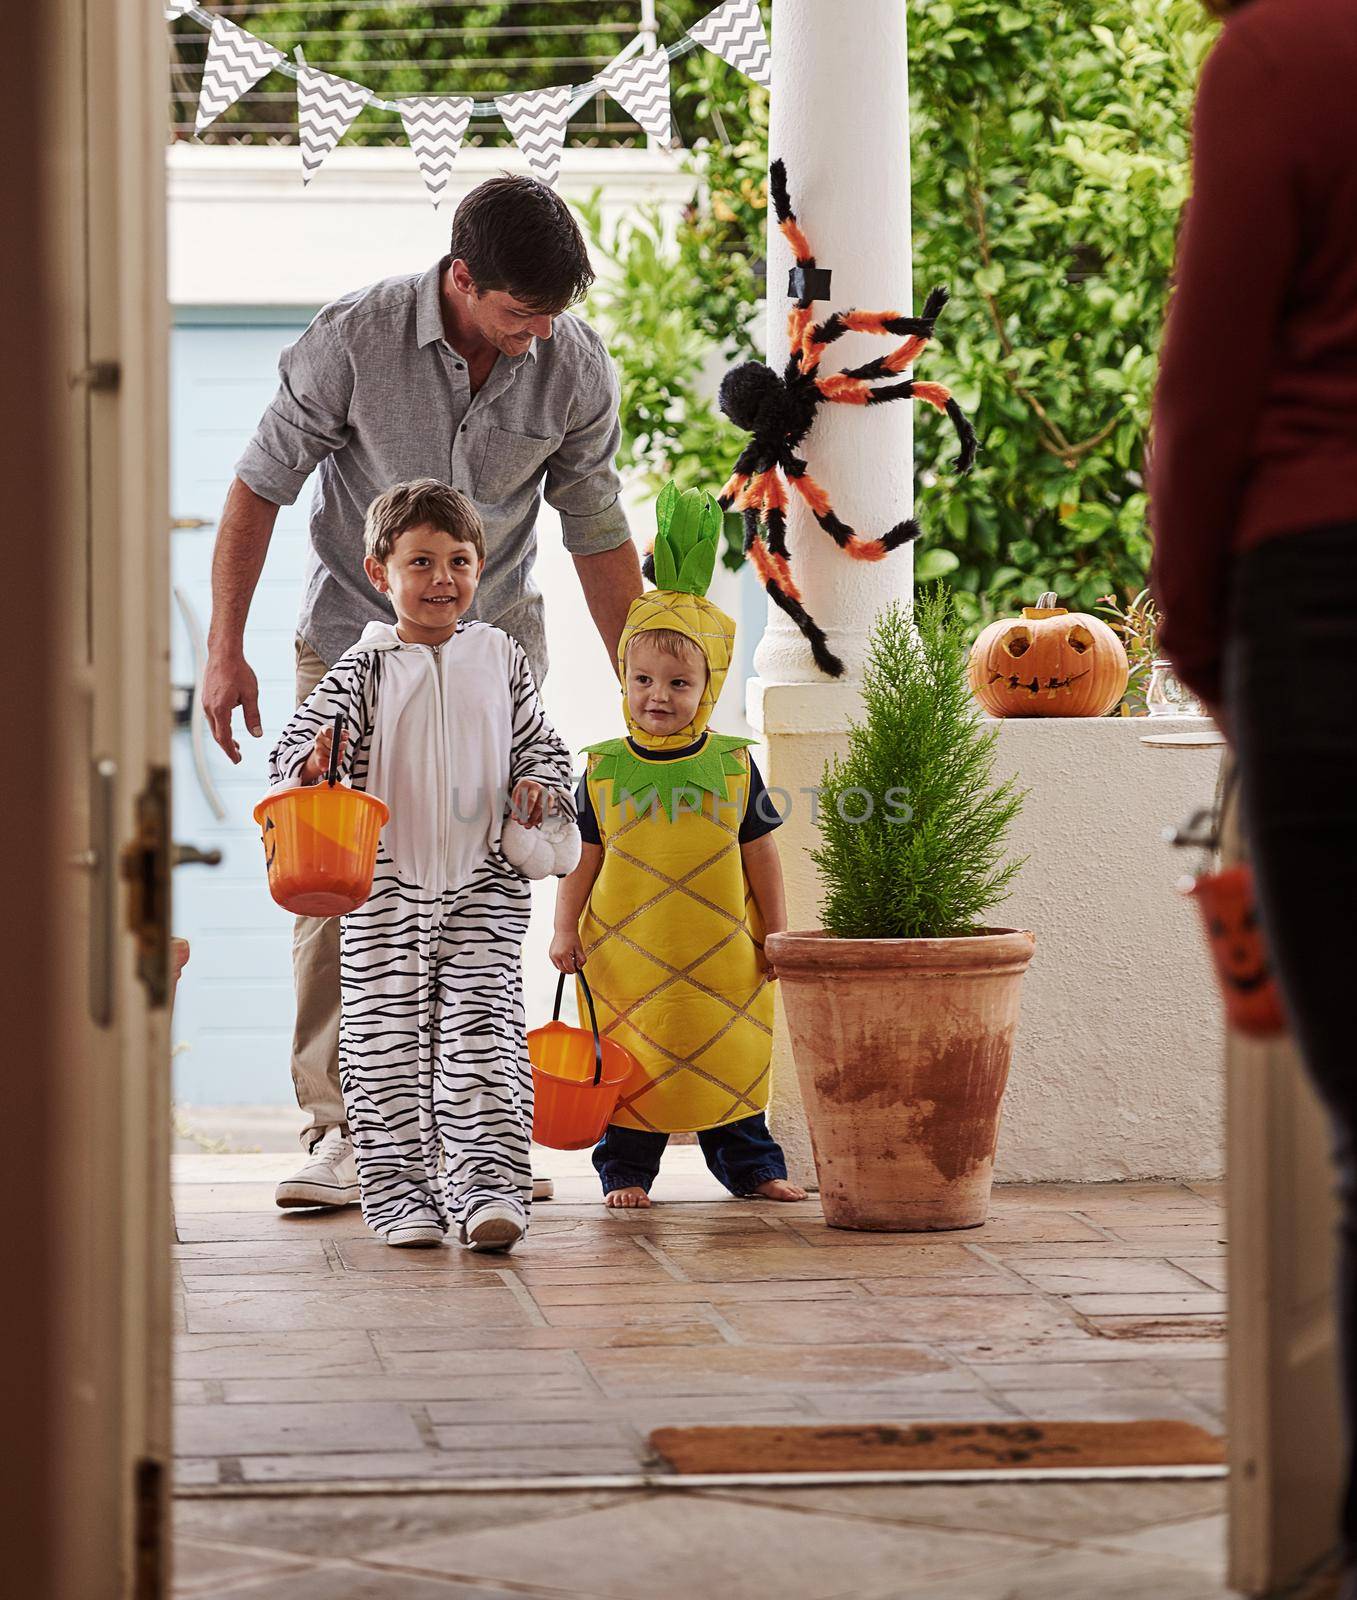 Halloween is always a real treat. Full length shot of a father and his adorable young sons trick or treating together on halloween